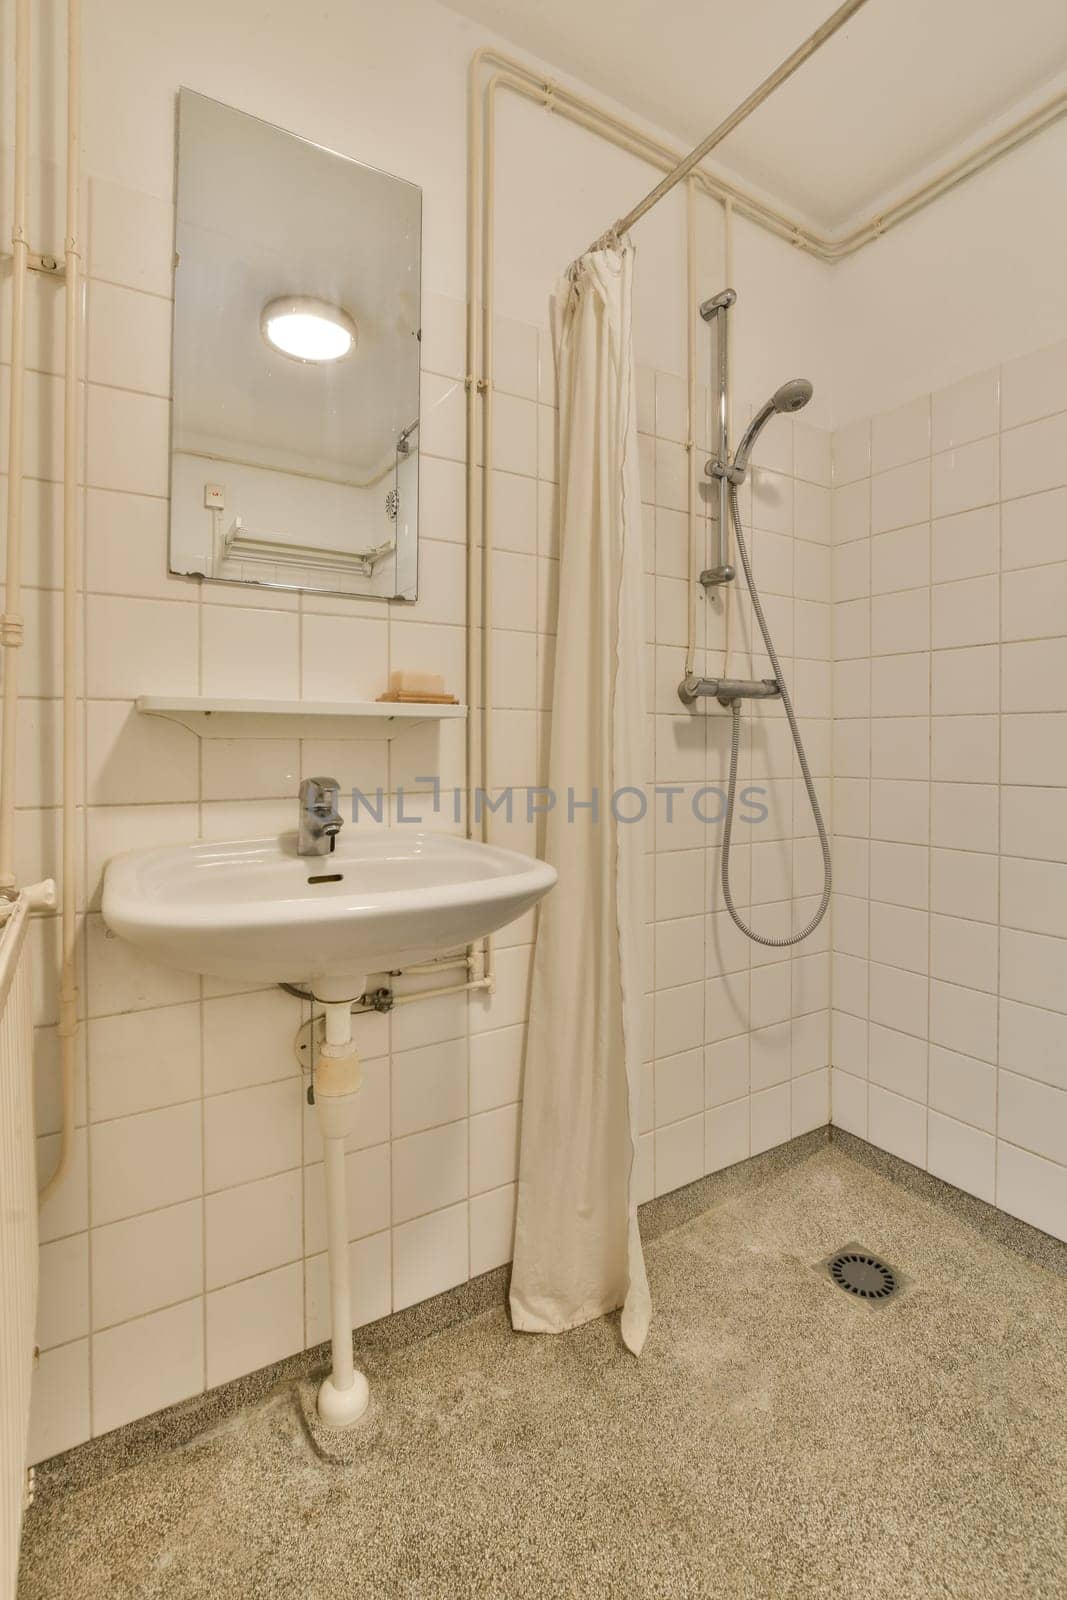 a bathroom with a sink, mirror and shower head mounted on the wall in it's corner to the right